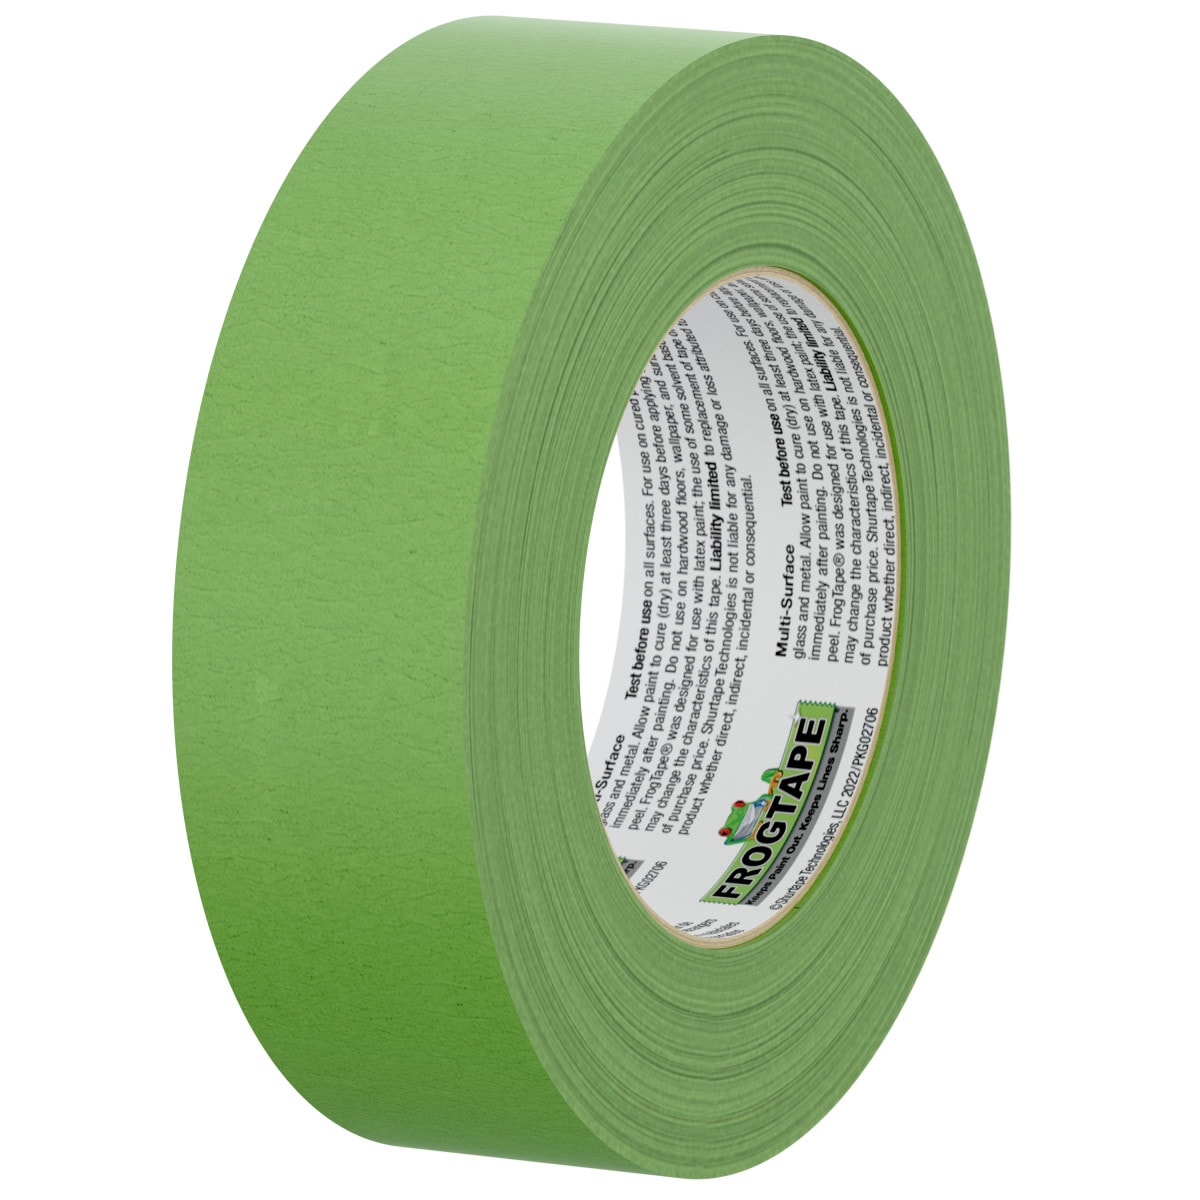 FrogTape 1.41 in. x 60 yd. Green Multi-Surface Painter's Tape